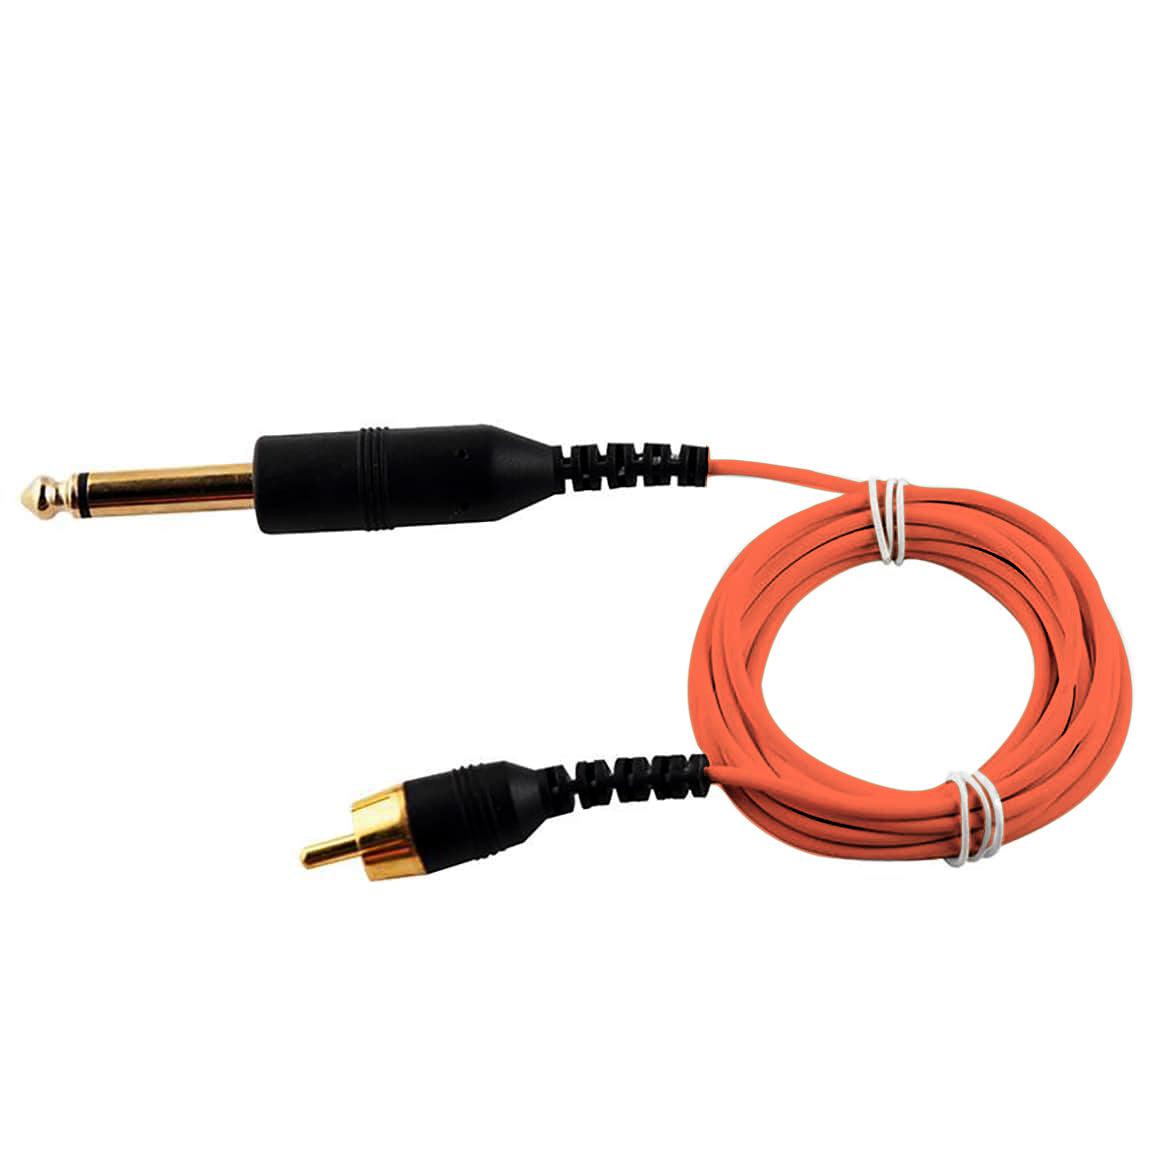 FYT Premium Gold Plated RCA Cable - 8FT - Power Supplies & Accessory - Mithra Tattoo Supplies Canada